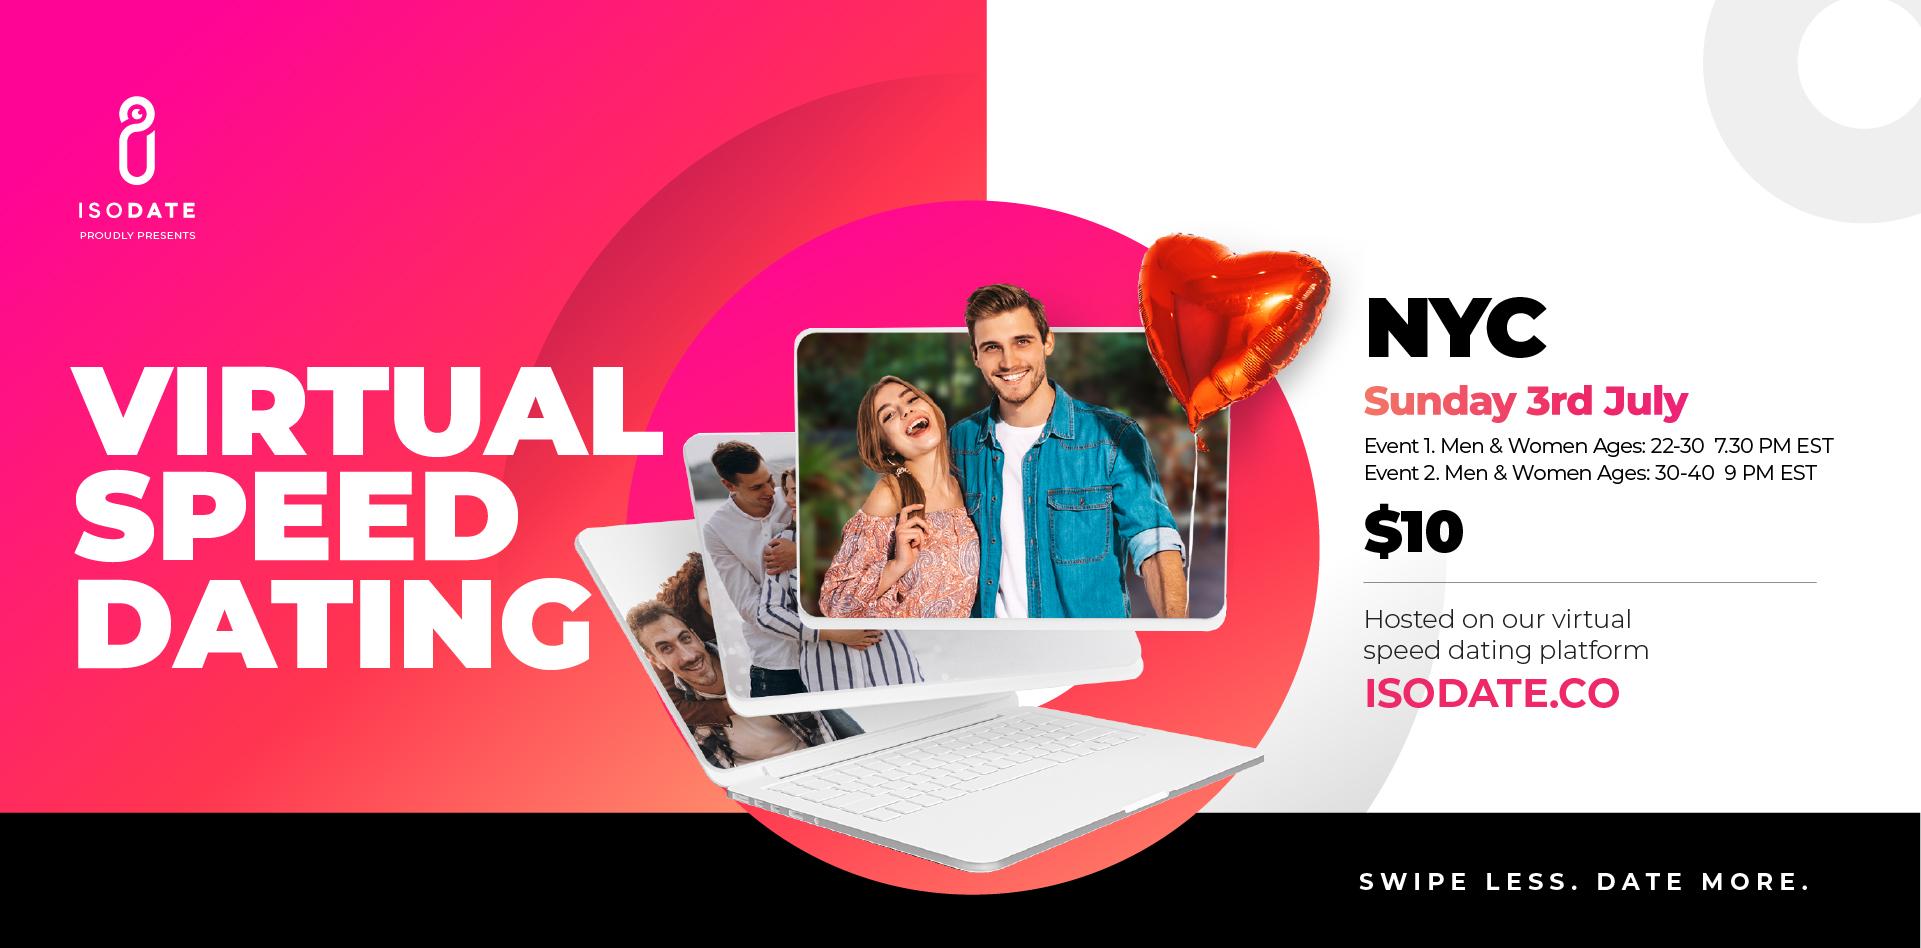 Isodate's NYC Virtual Speed Dating Swipe Less, Date More Isodate